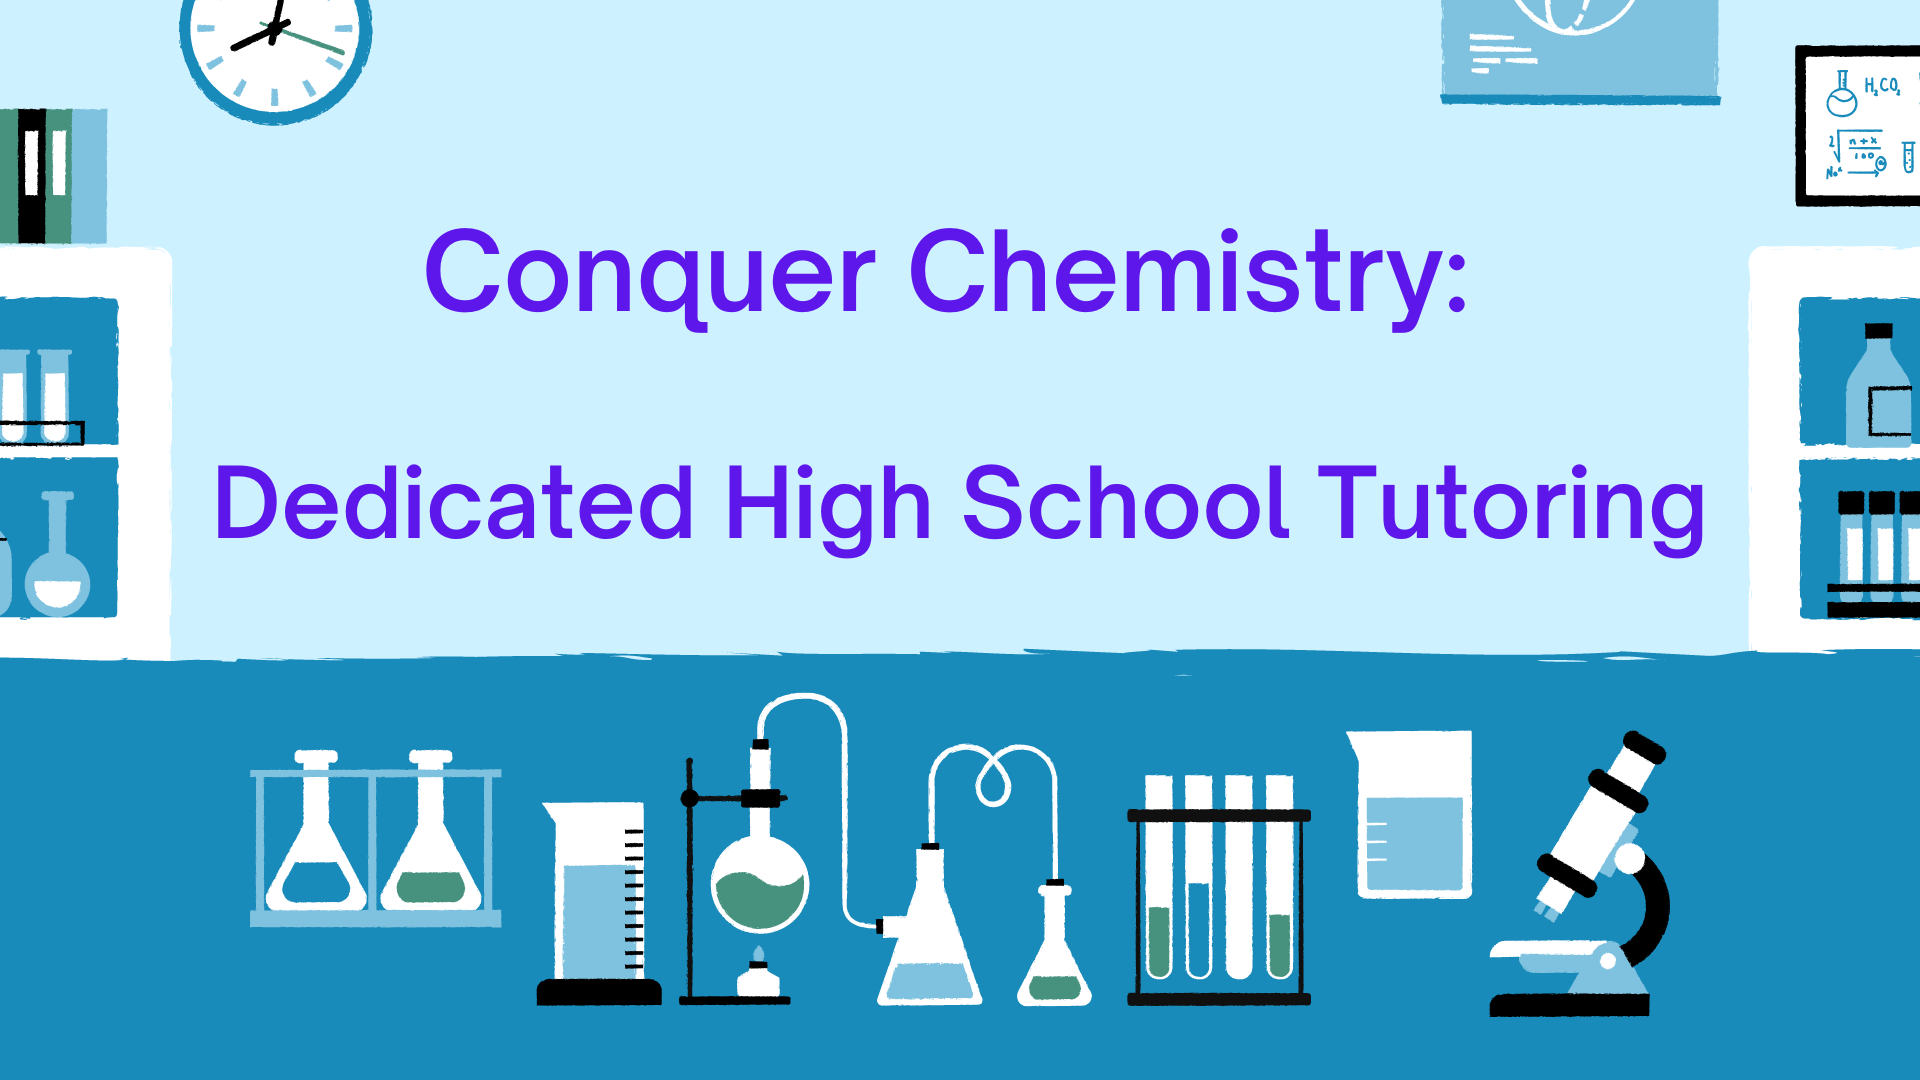 Conquer Chemistry: Dedicated High School Tutoring